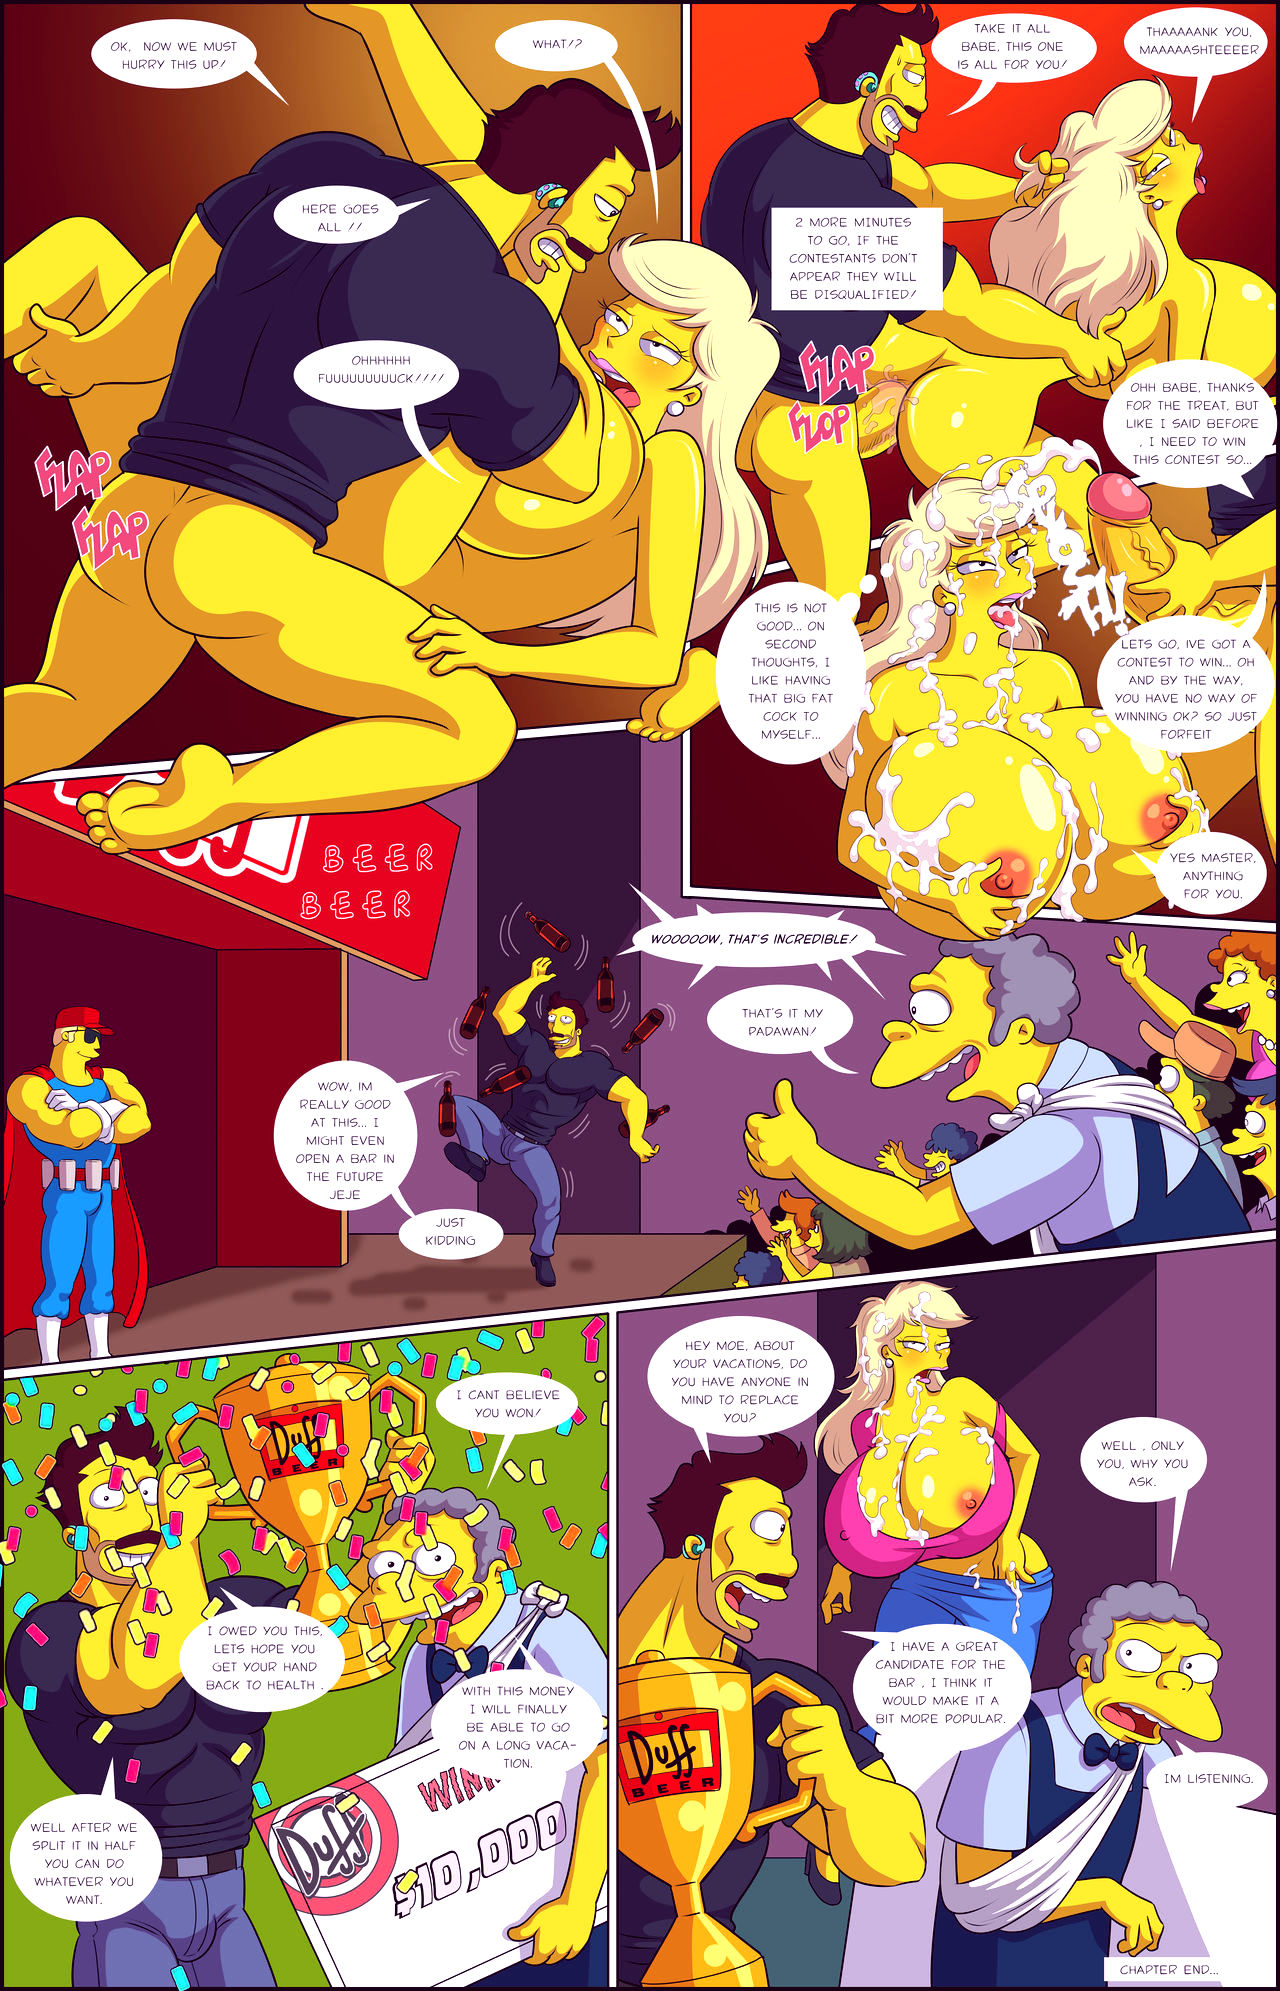 Darrens adventure or welcome to springfield porn comic picture 27